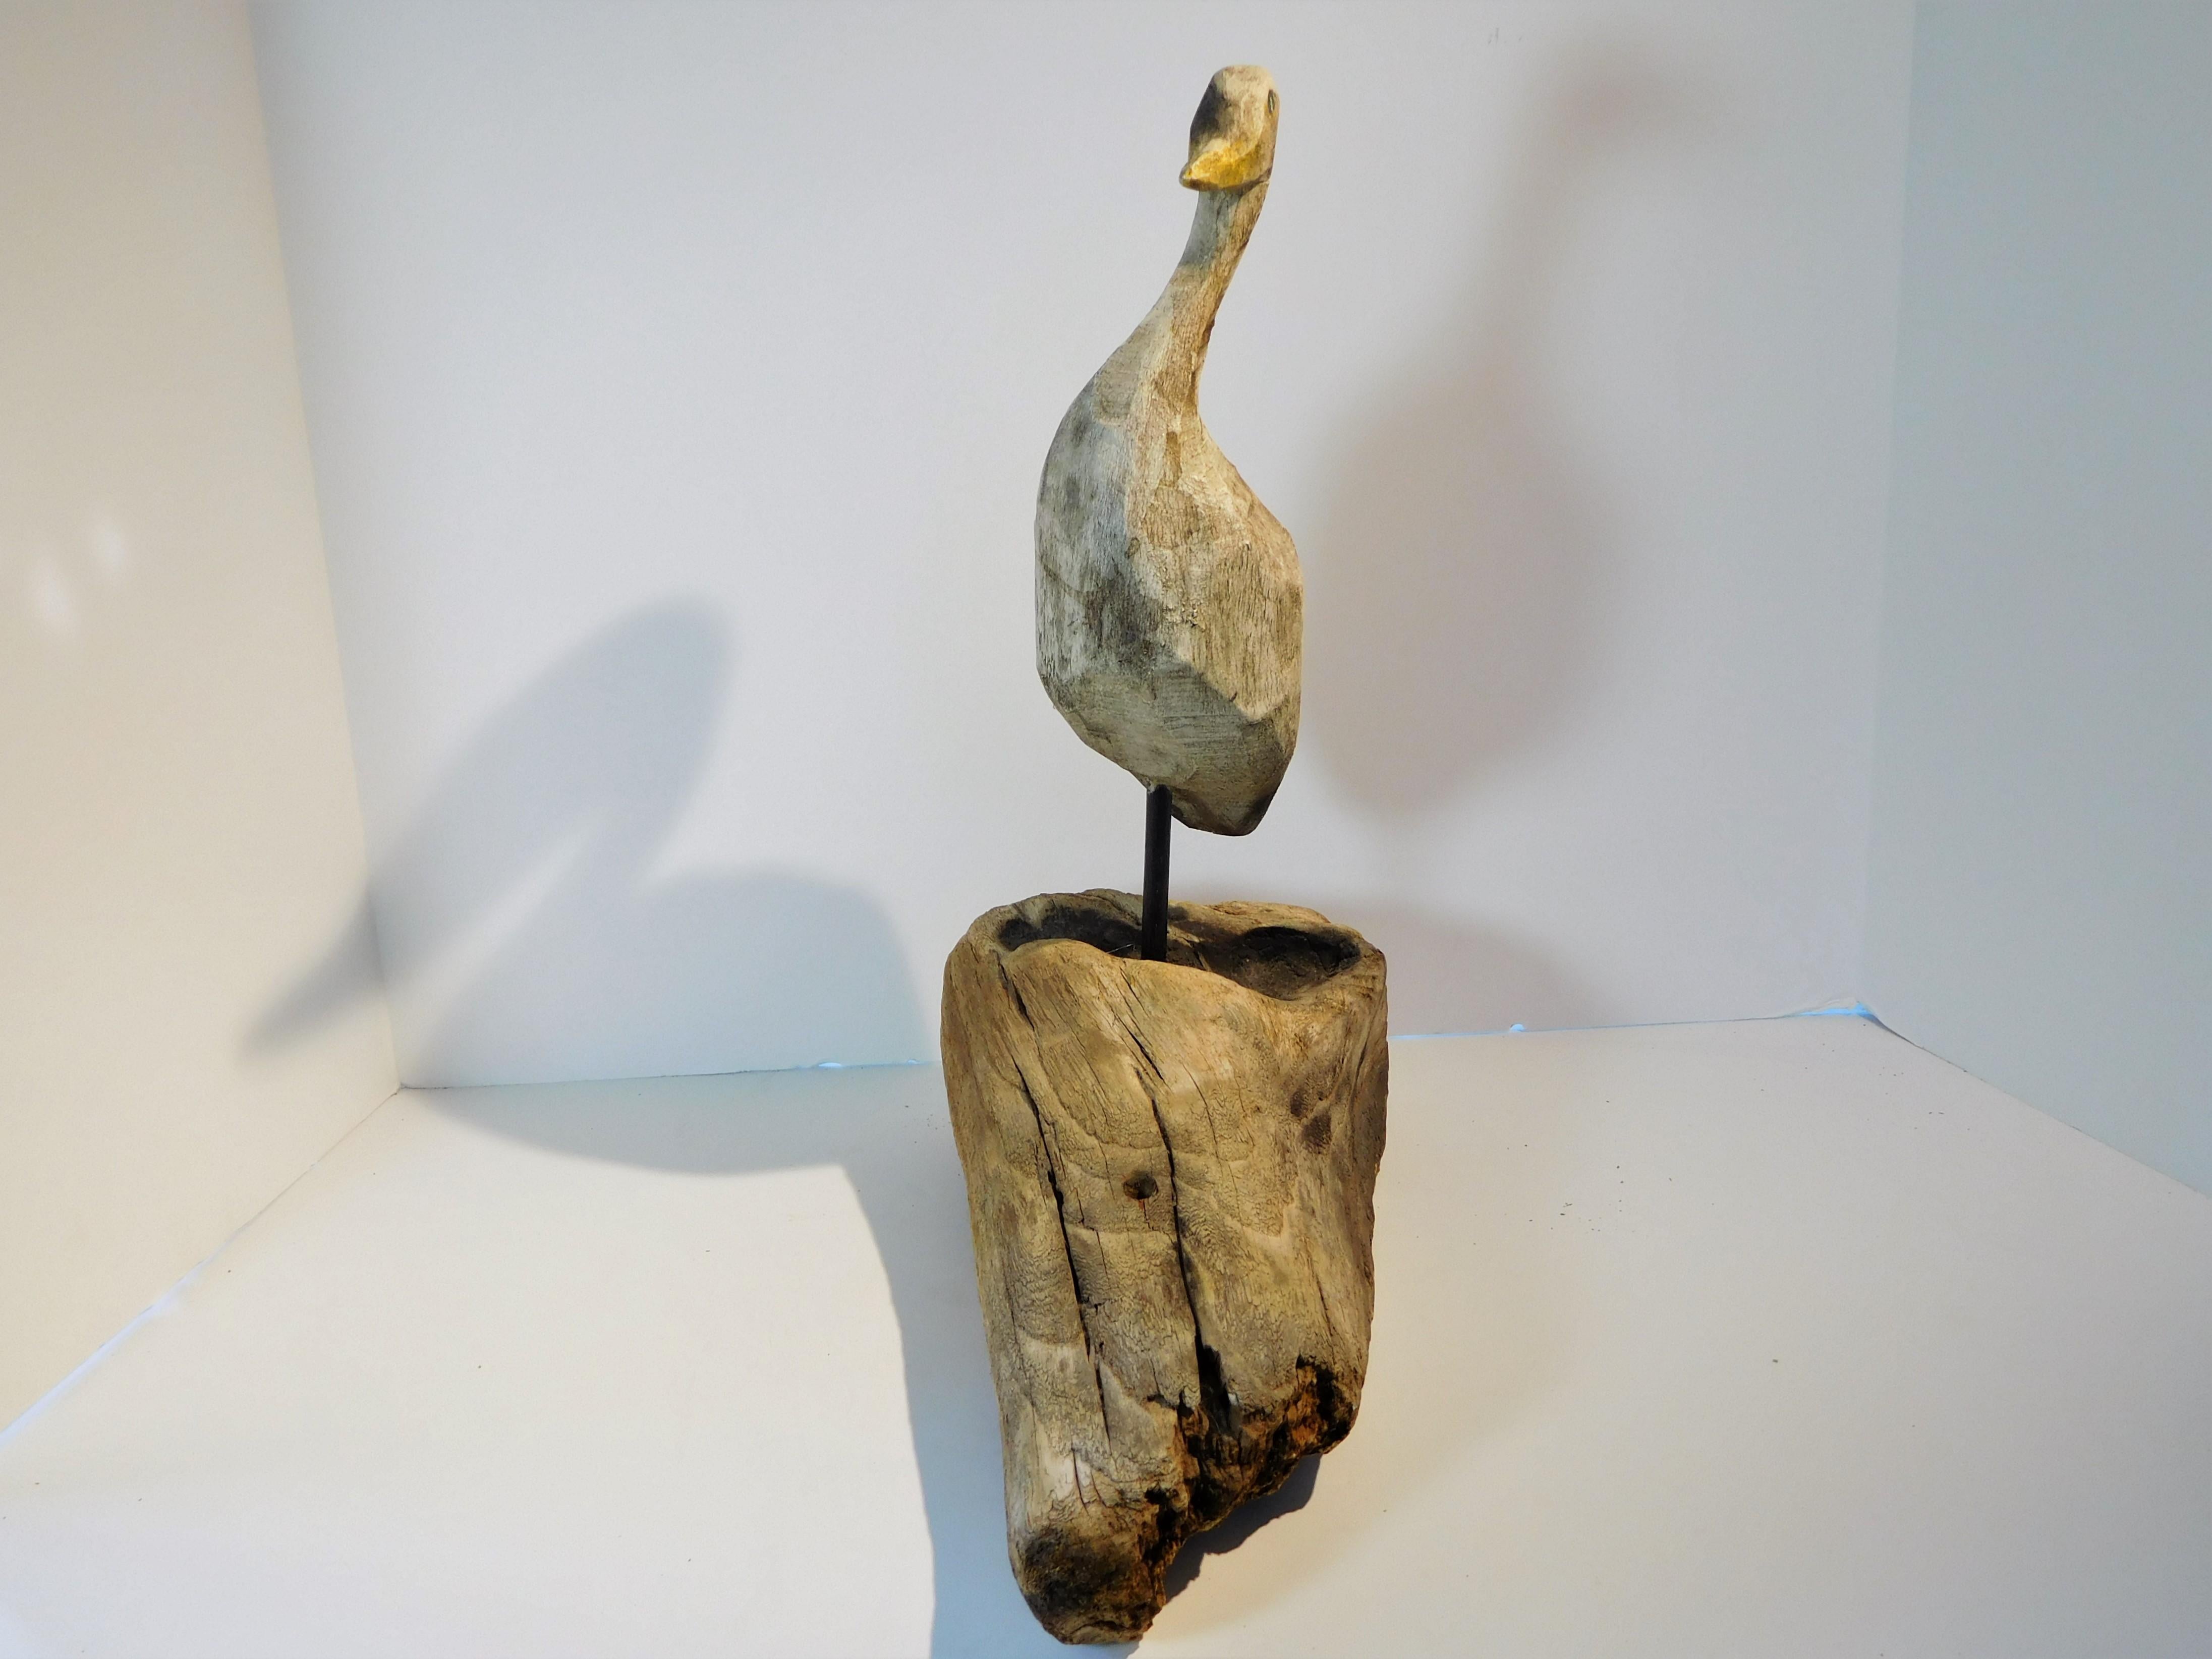 This endearing, life-like shore bird decoy is hand carved and painted. It is mounted on an iron rod and supported by a driftwood base. The carving is sophisticated and realistic. The overall patina of the decoy and the driftwood base give this piece